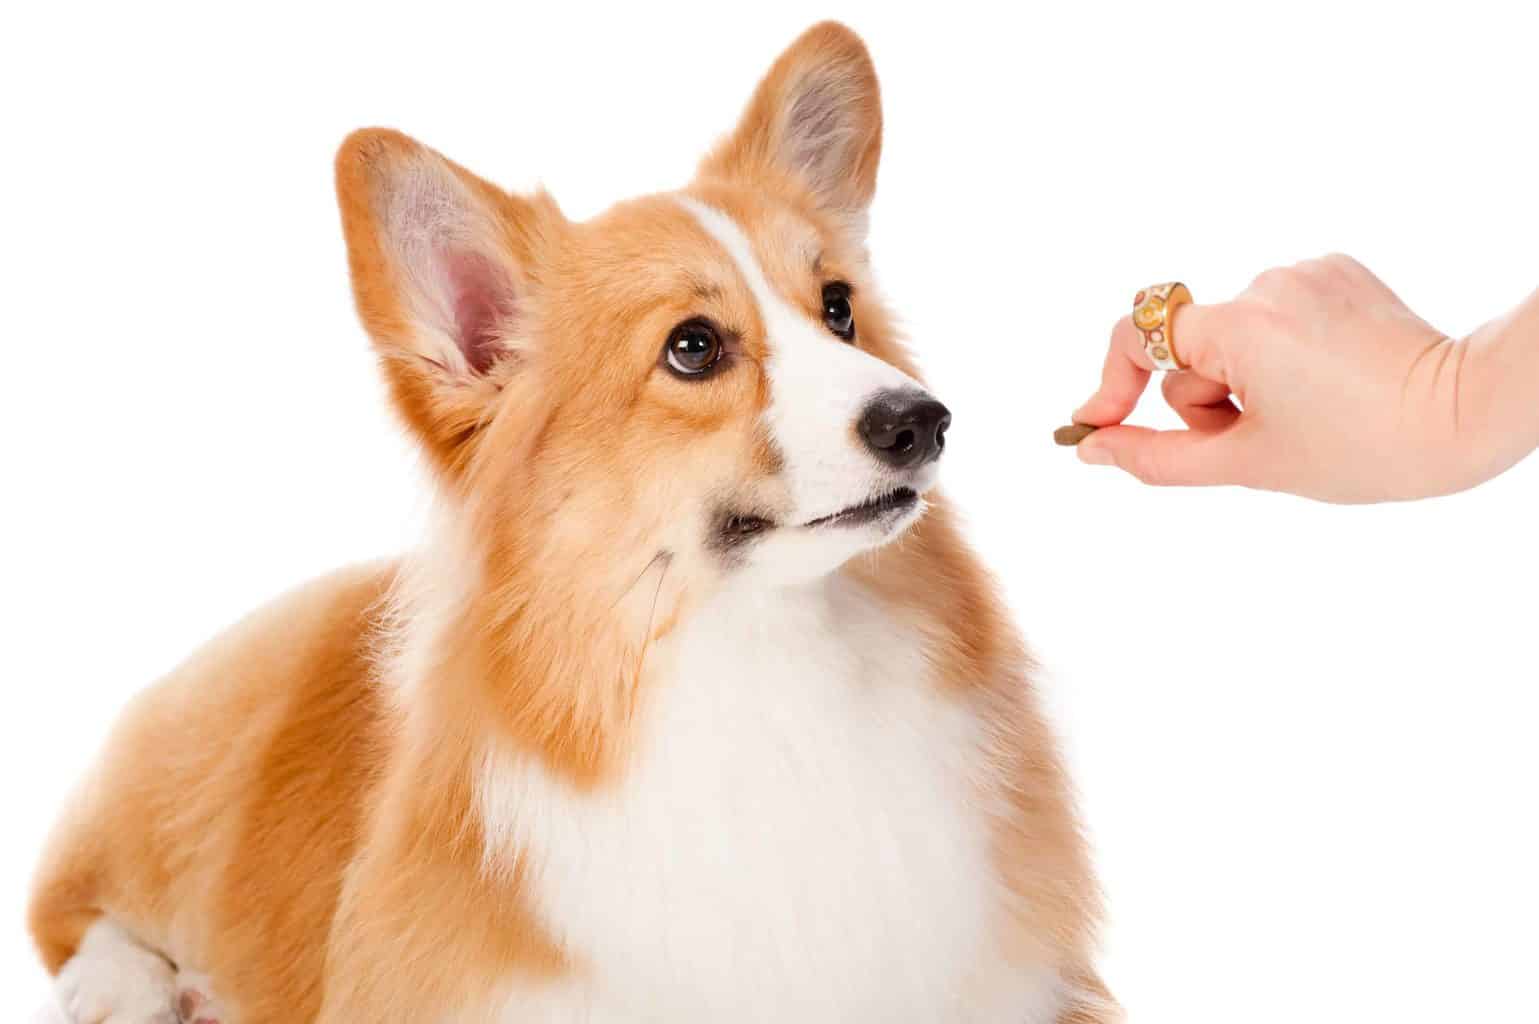 Owner gives Corgi a training treat. Treats or snacks are a popular dog accessory that makes it easier to train your dog.